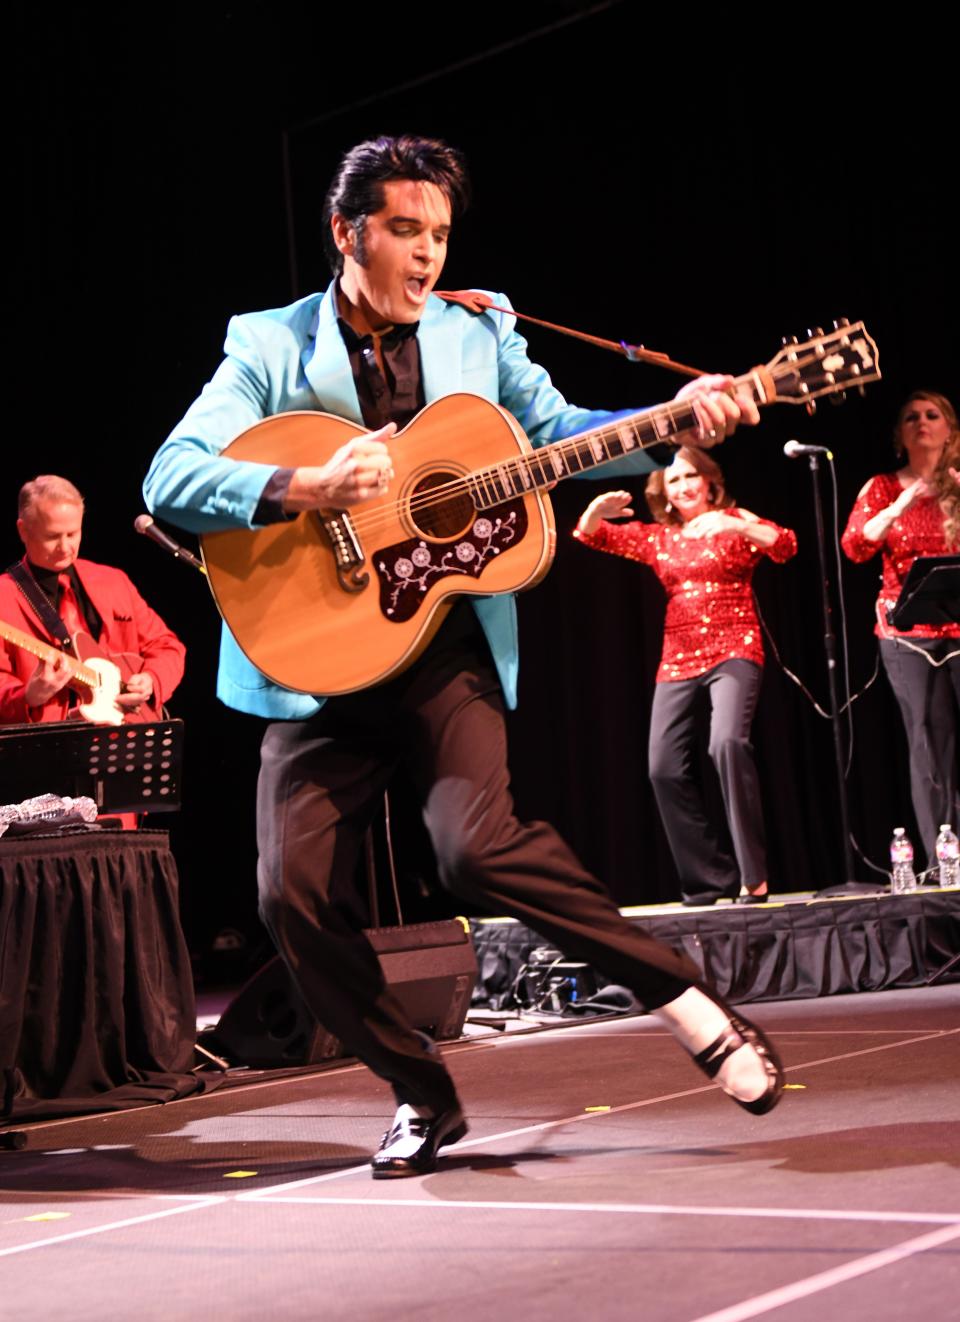 Elvis tribute artist Dean Z will be part of this year's Elvis Week events.